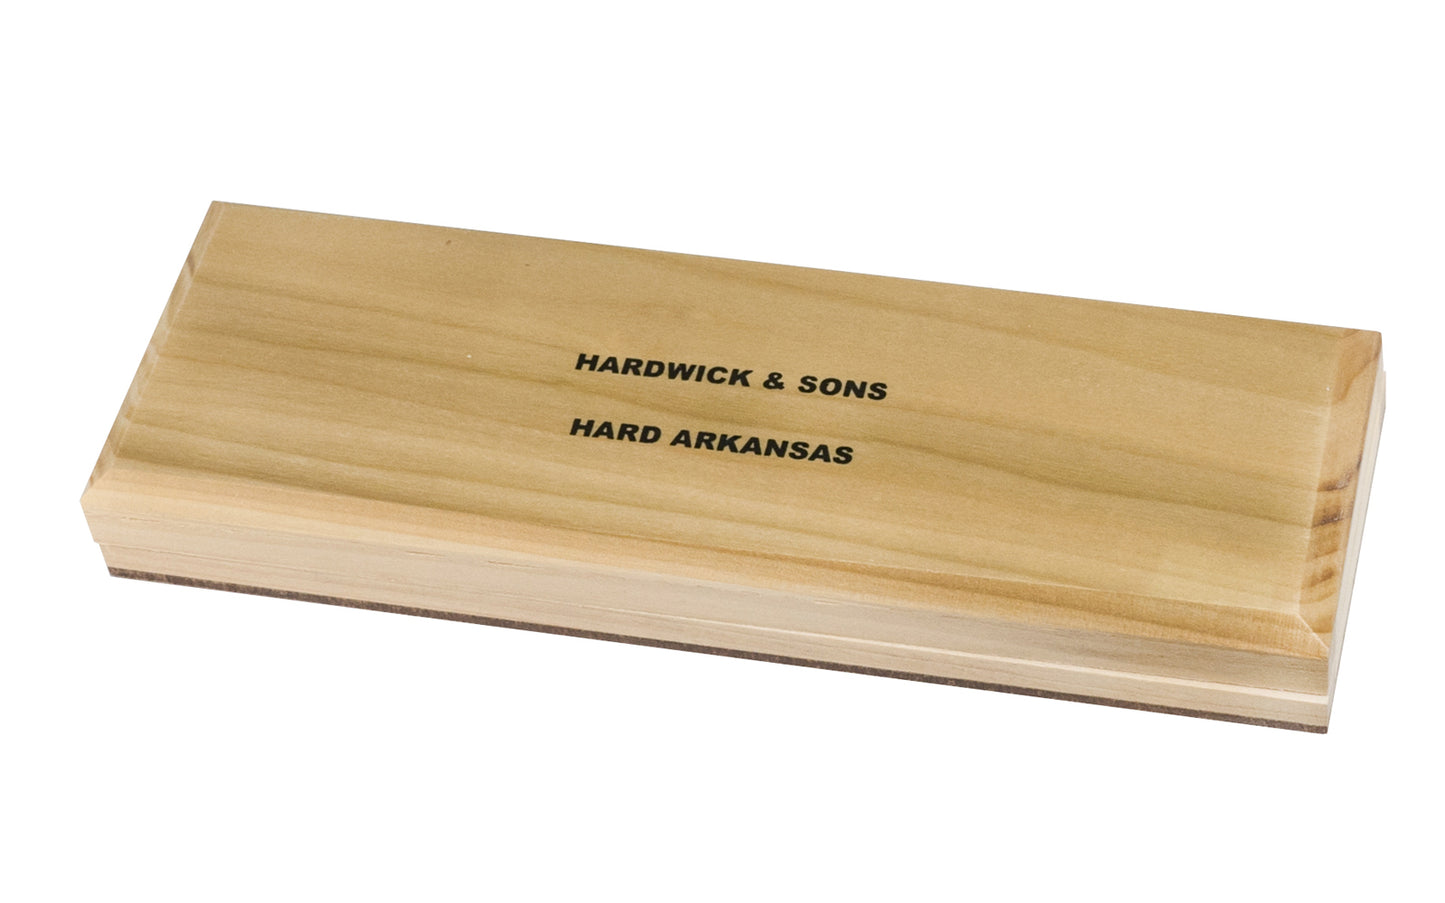 Hard Arkansas Bench Stone with Wooden Box ~ 8" x 2" - Made in USA ~ Super-fine stone that is satisfactory for the final edge on woodworking cutting tools & knives. Use a few drops of mineral oil to prevent glazing while sharpening - Model No. FAB-82-C